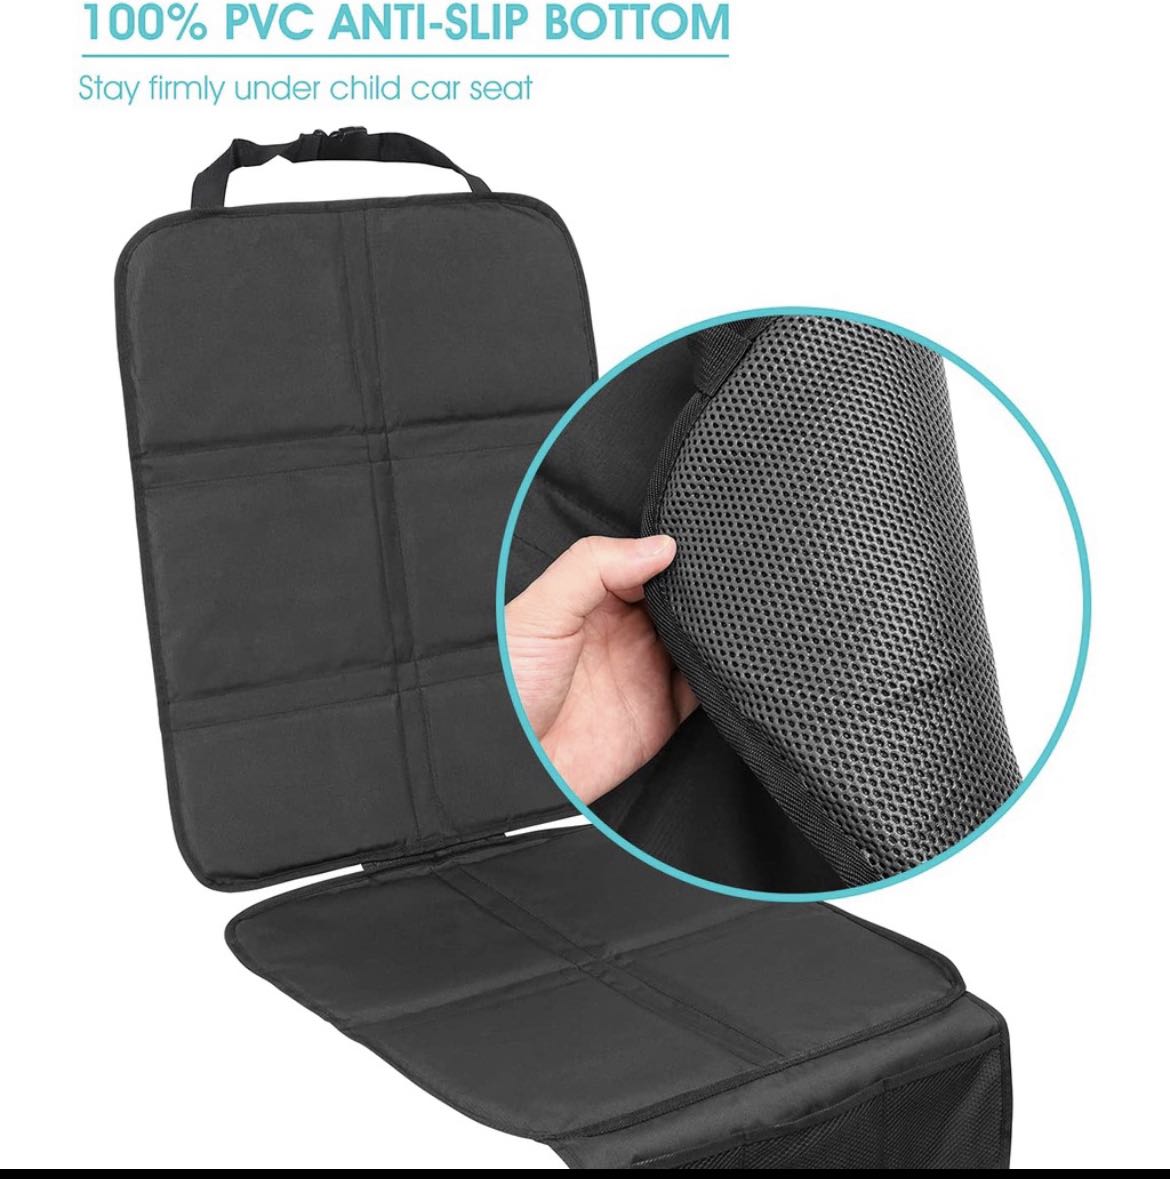 Apramo ONETM Car Seat Protector Anti-Slip Auto Seat Protection Cover for Child Car Seat